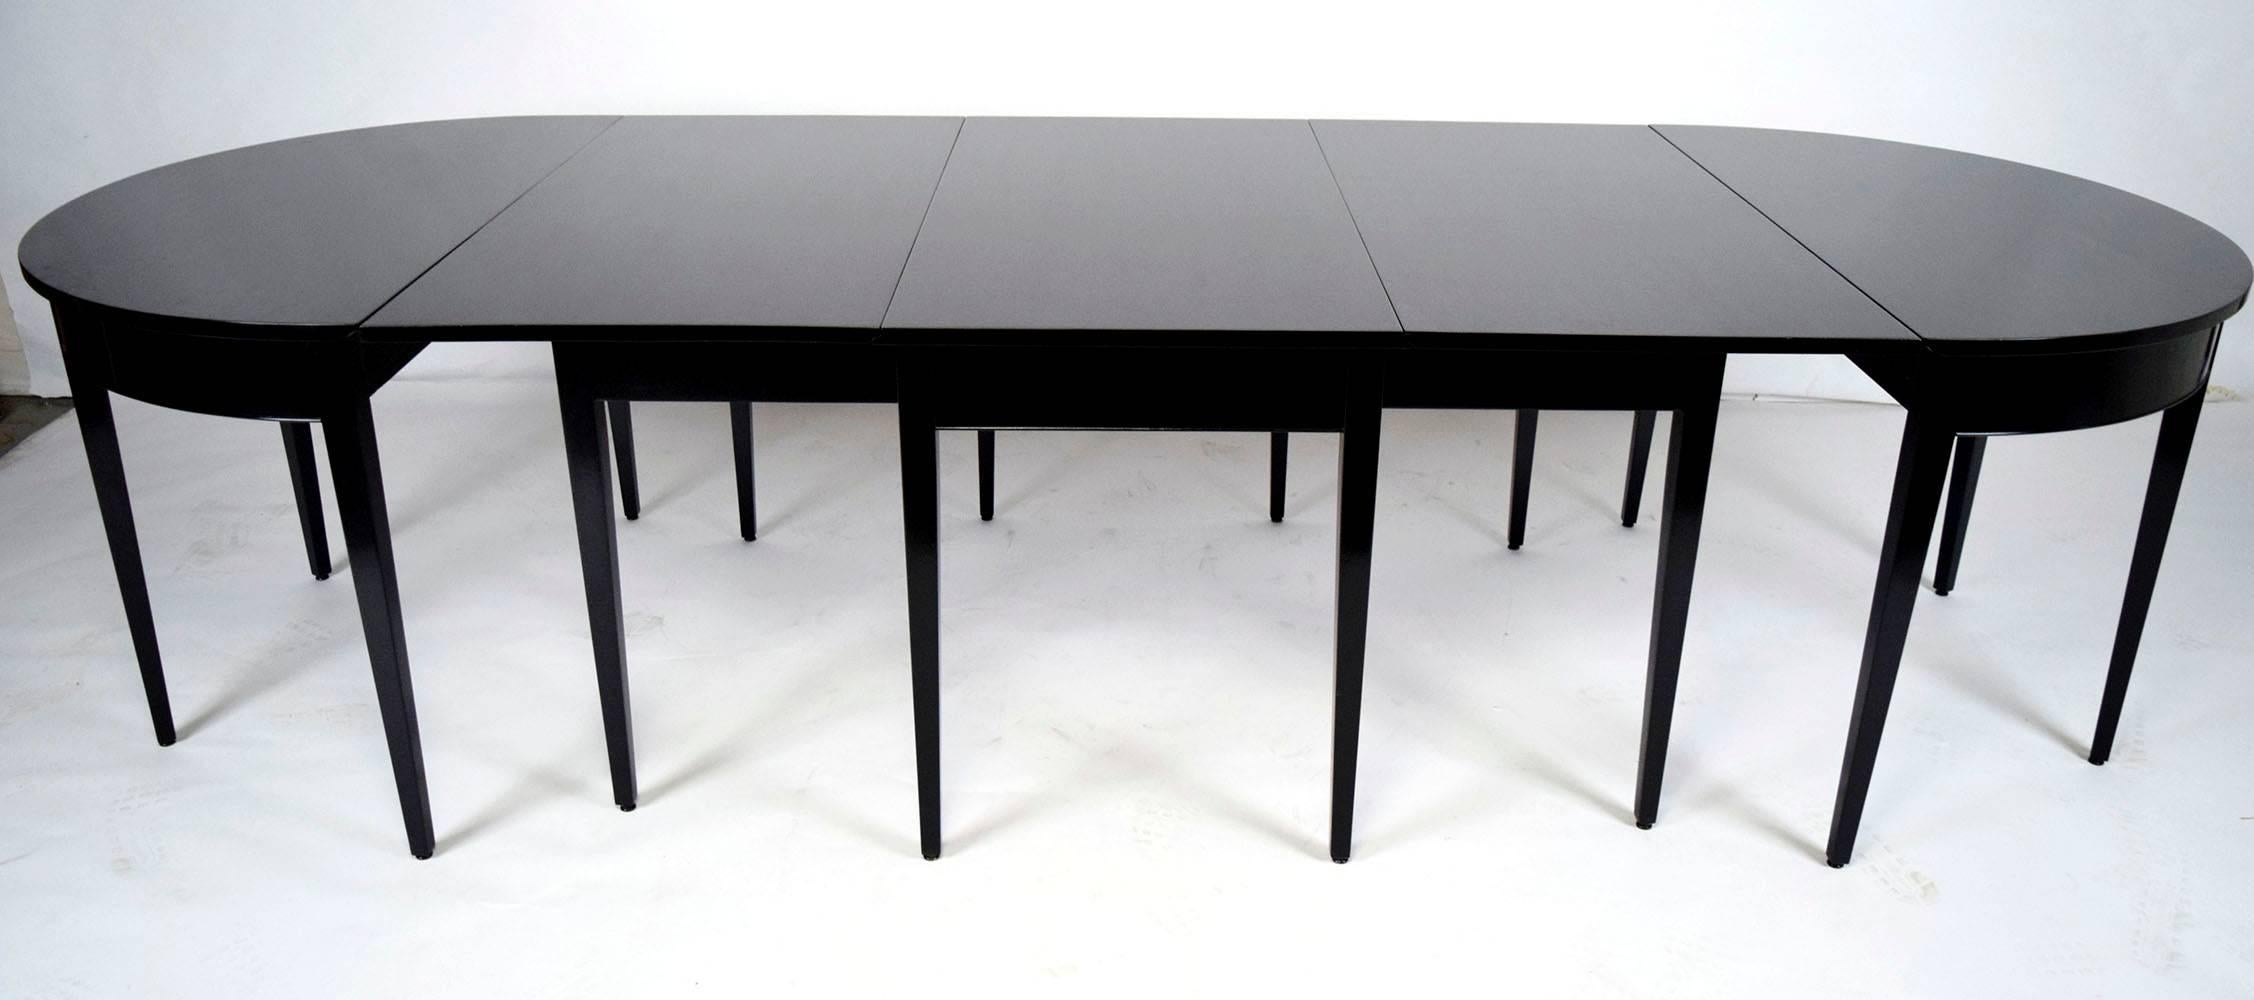 This 1930s, Federal-style hepplewhite dining table is made from mahogany wood that has recently been finished in a rich black color stain and a lacquered finish. The table separates into three parts. The center part is a rectangular table and there